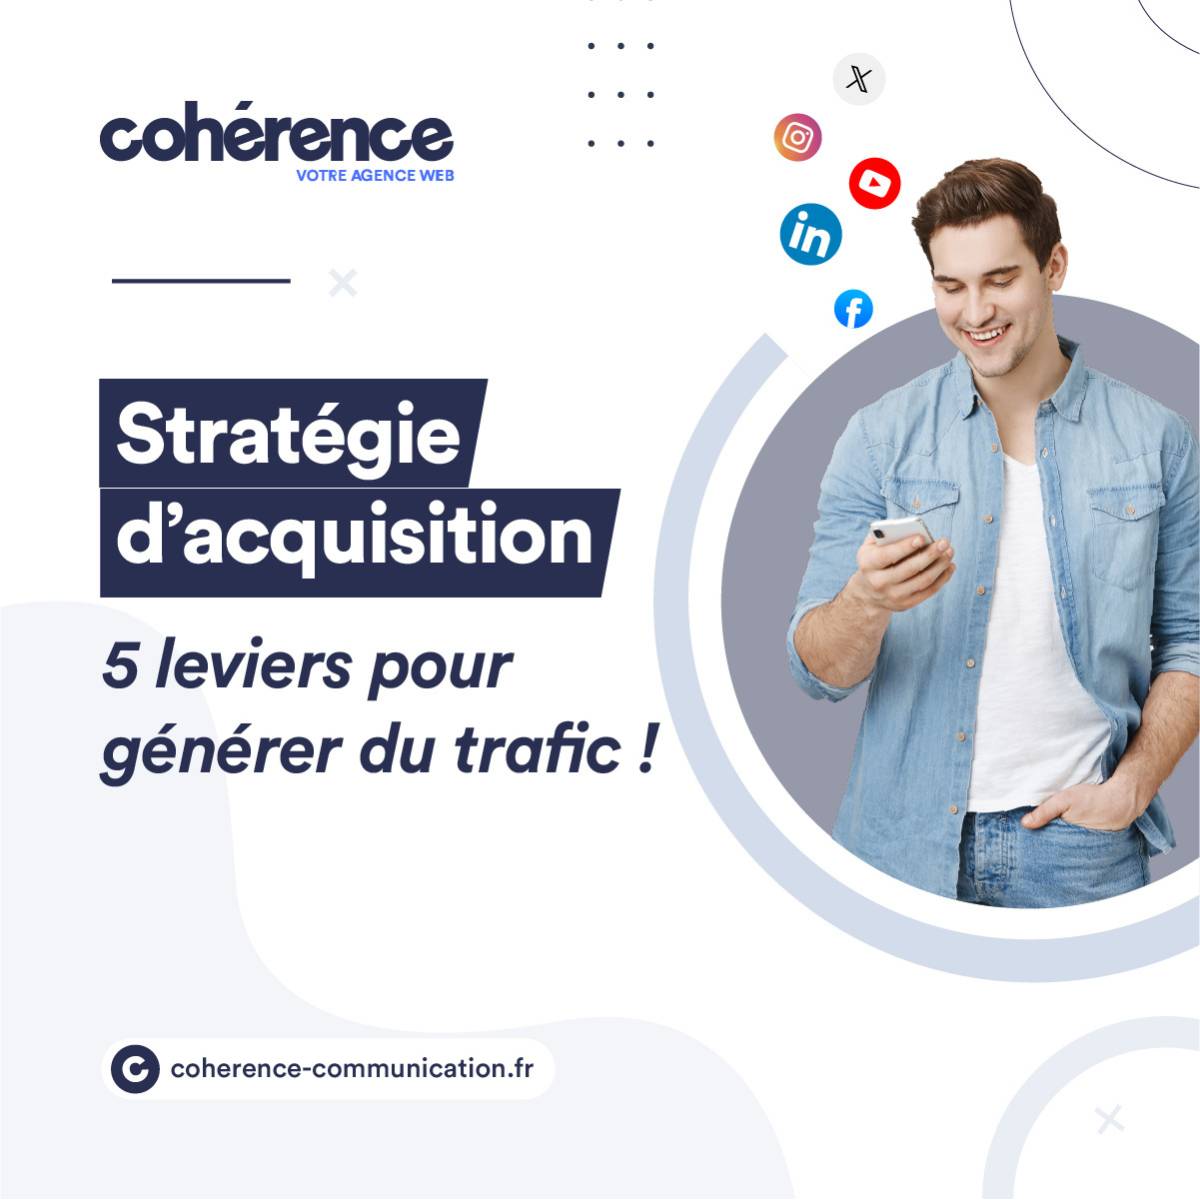 Coherence Agence Web Strategie Dacquisition 5 Leviers Pour Generer Du Trafic 2